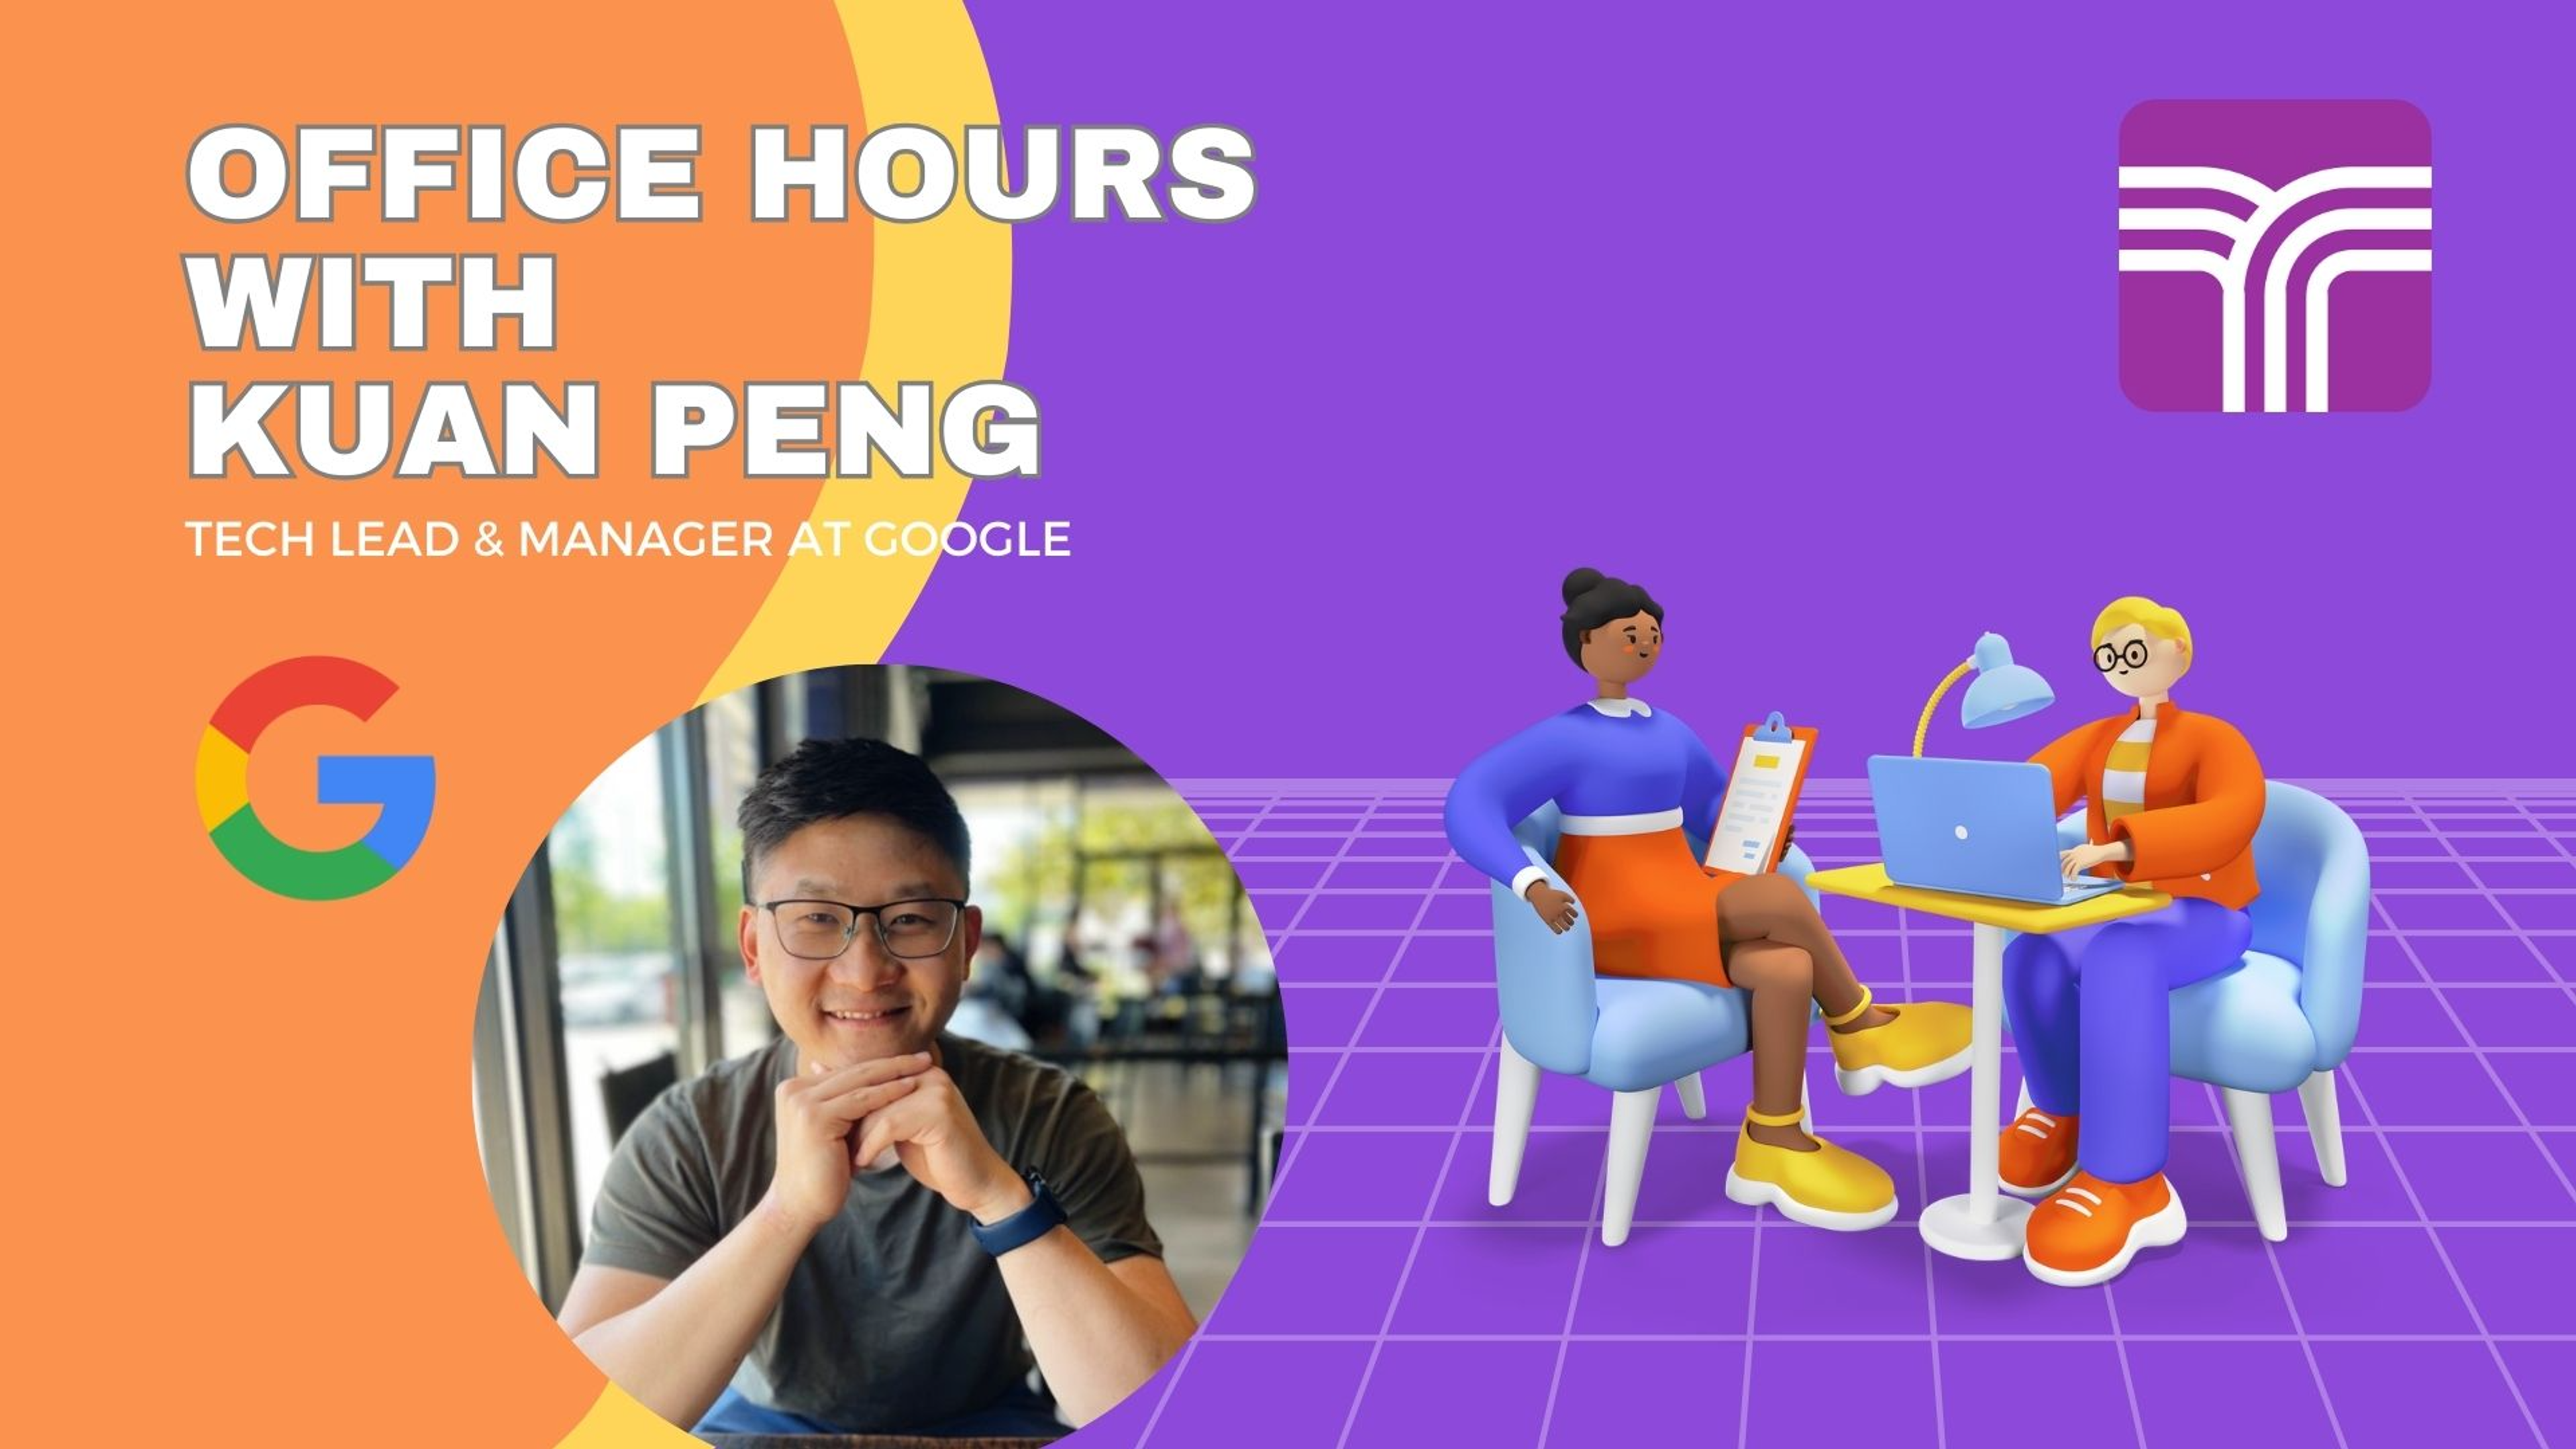 Group Office Hours with Kuan Peng (Google Tech Lead And Manager) event